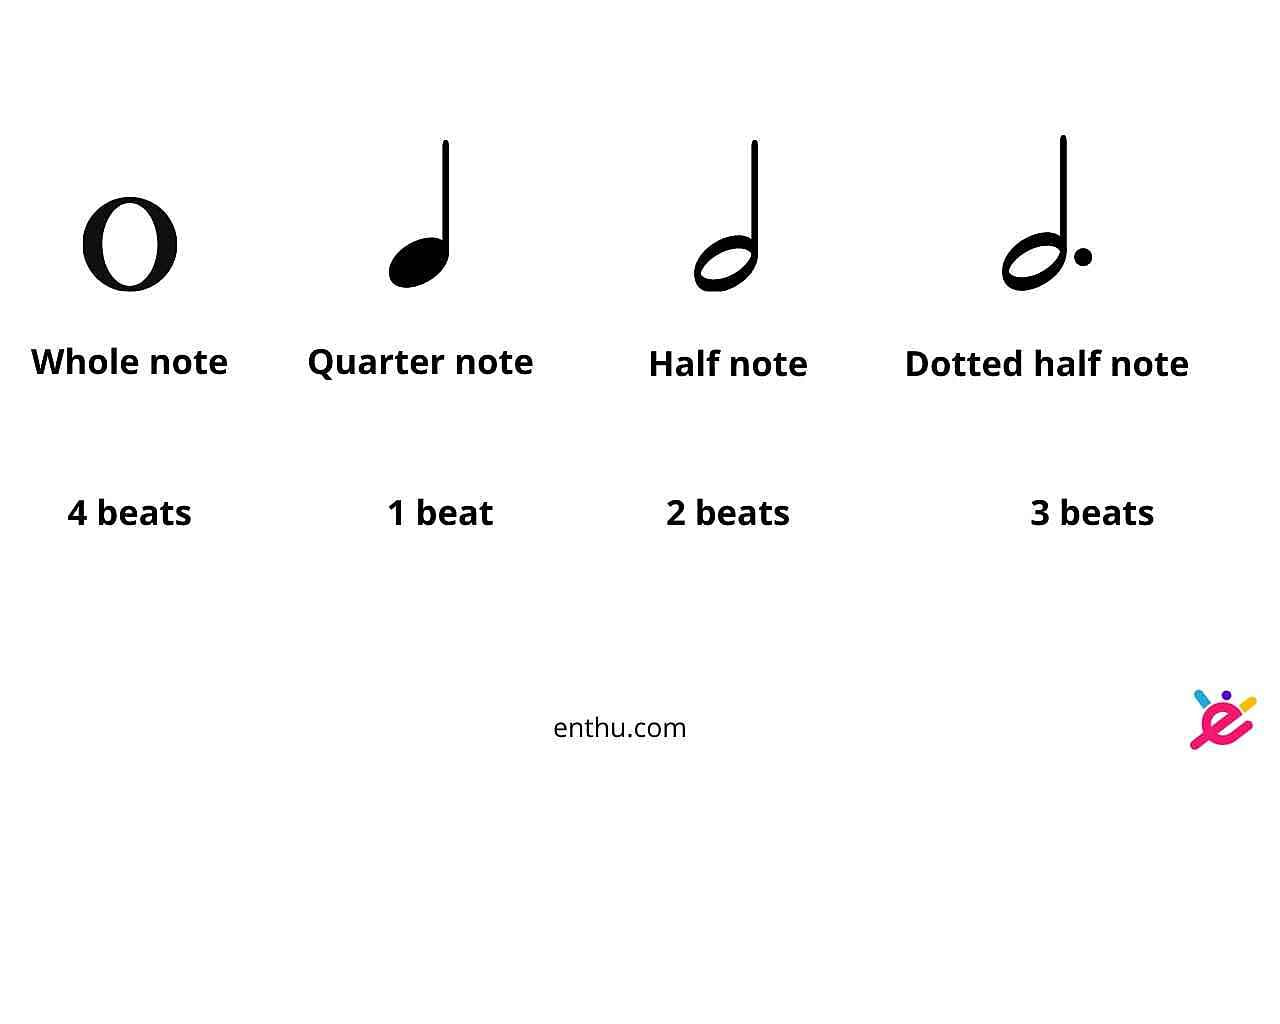 how many beats is a whole note